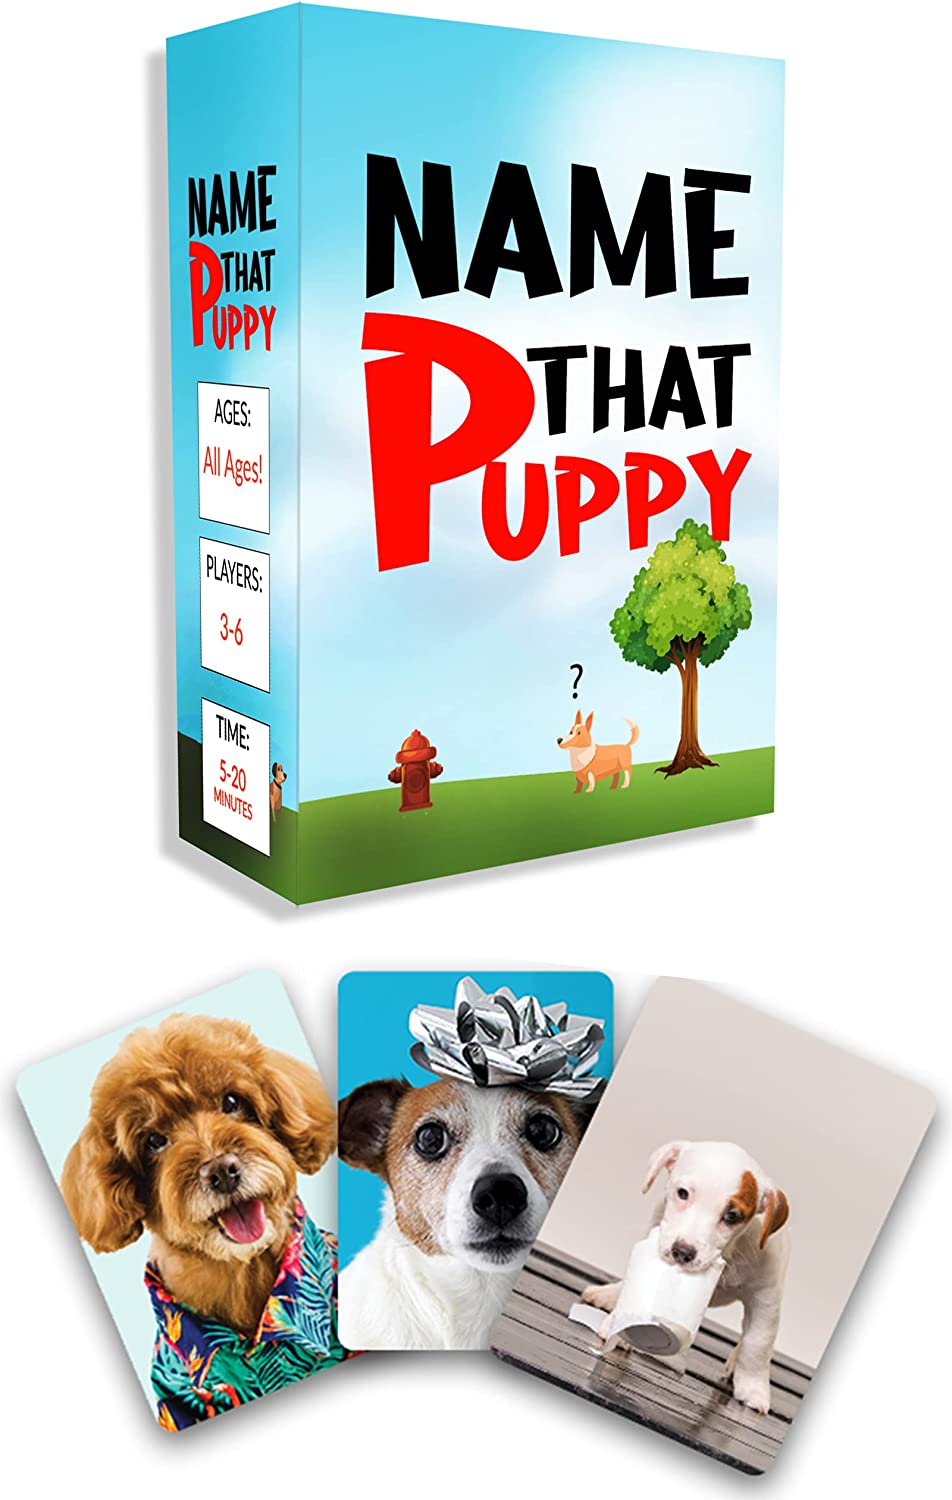 A game box says Name That Puppy. There are three playing cards shown with different puppies on them. (fun card games)